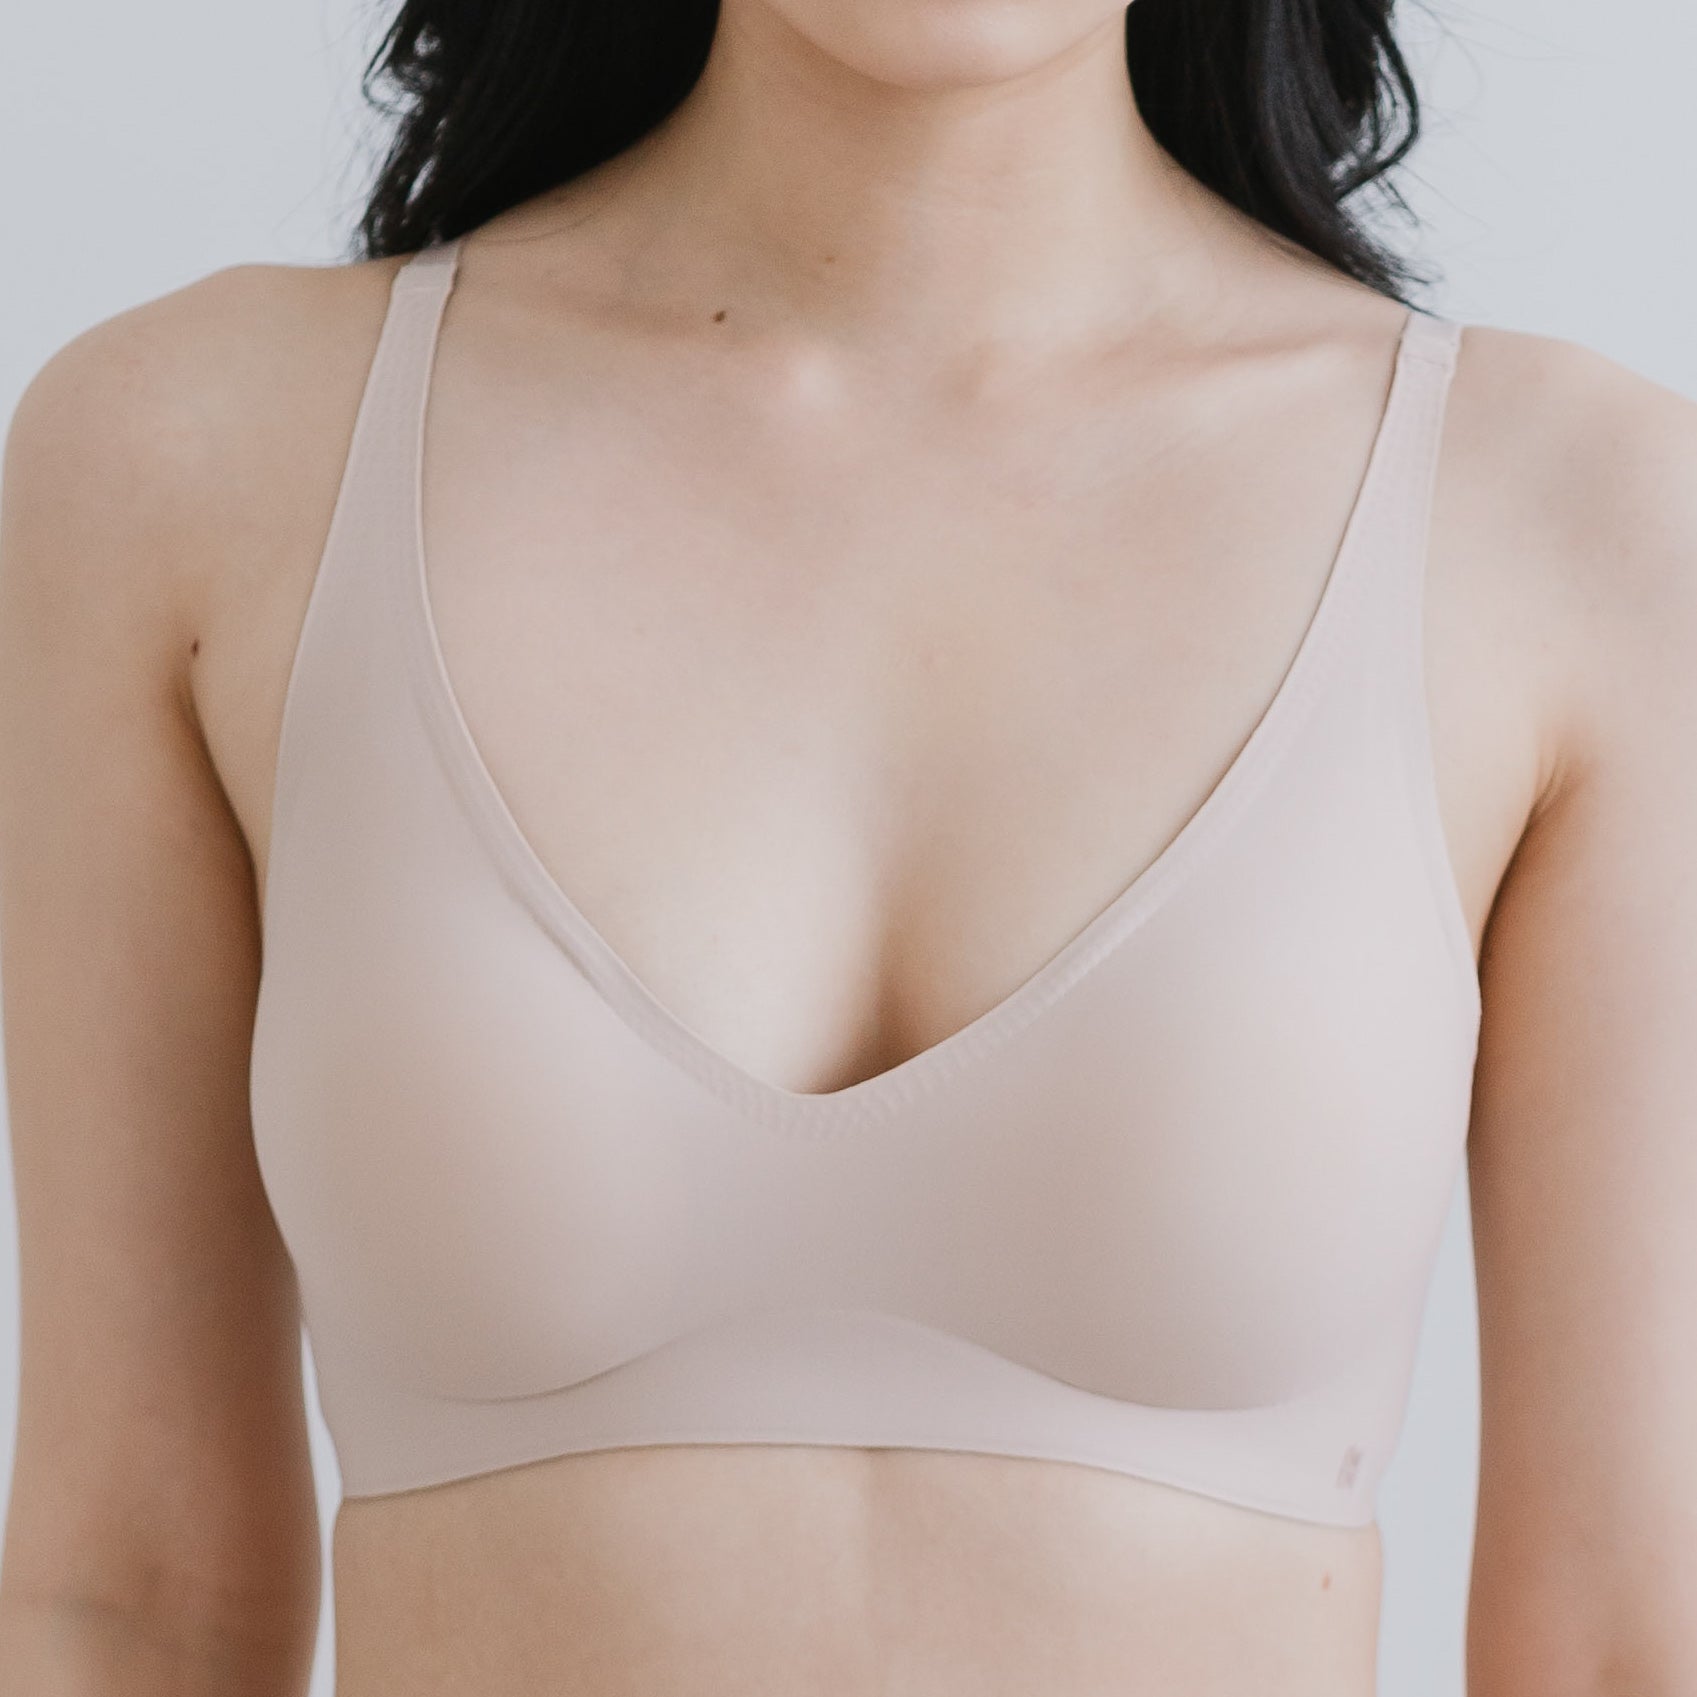 Air-ee Seamless Bra in Black - V-Neck (Signature Edition)